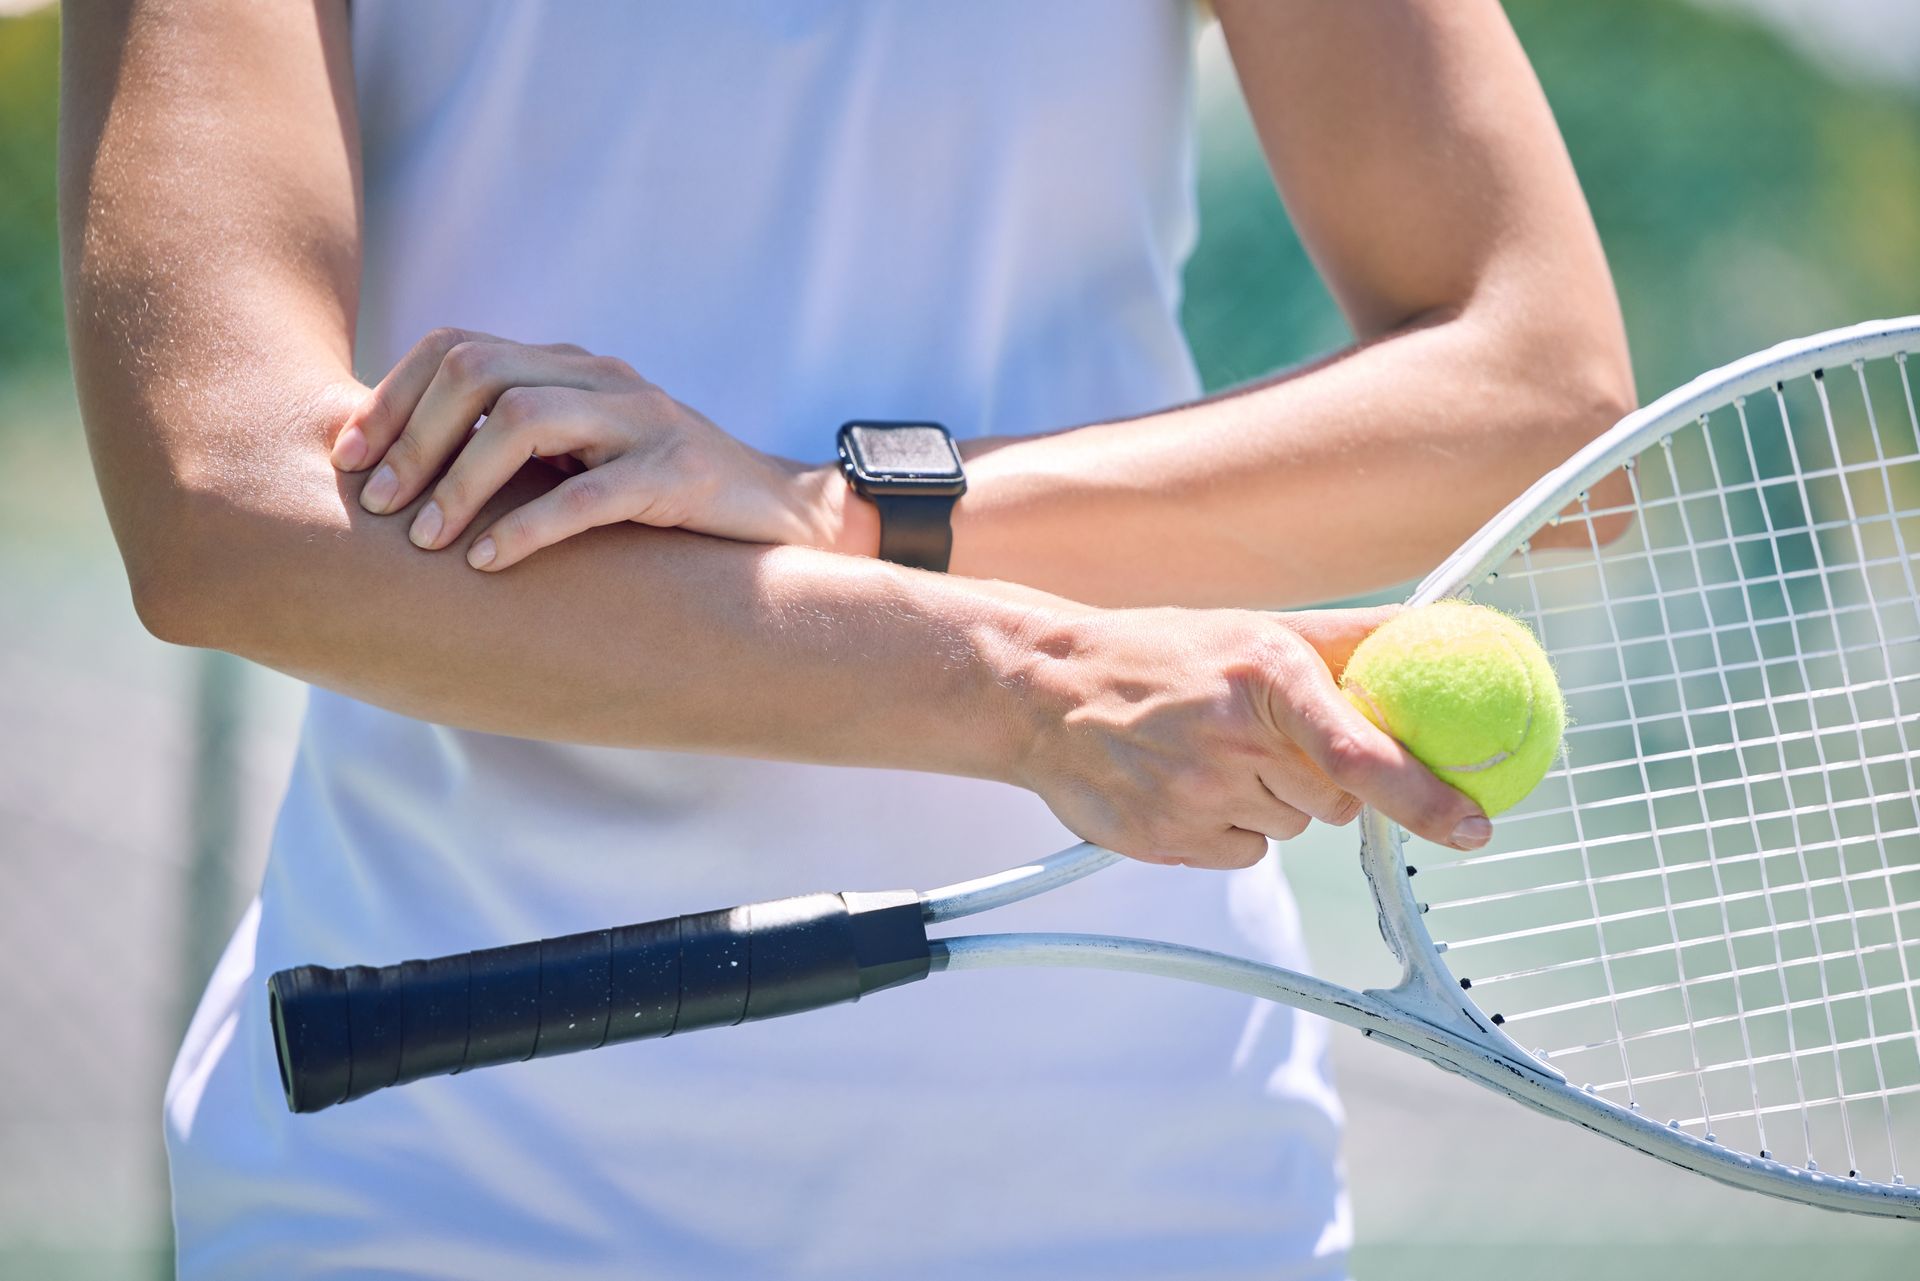 Managing Tennis Elbow: Comprehensive Treatment Options from Rest to Surgery